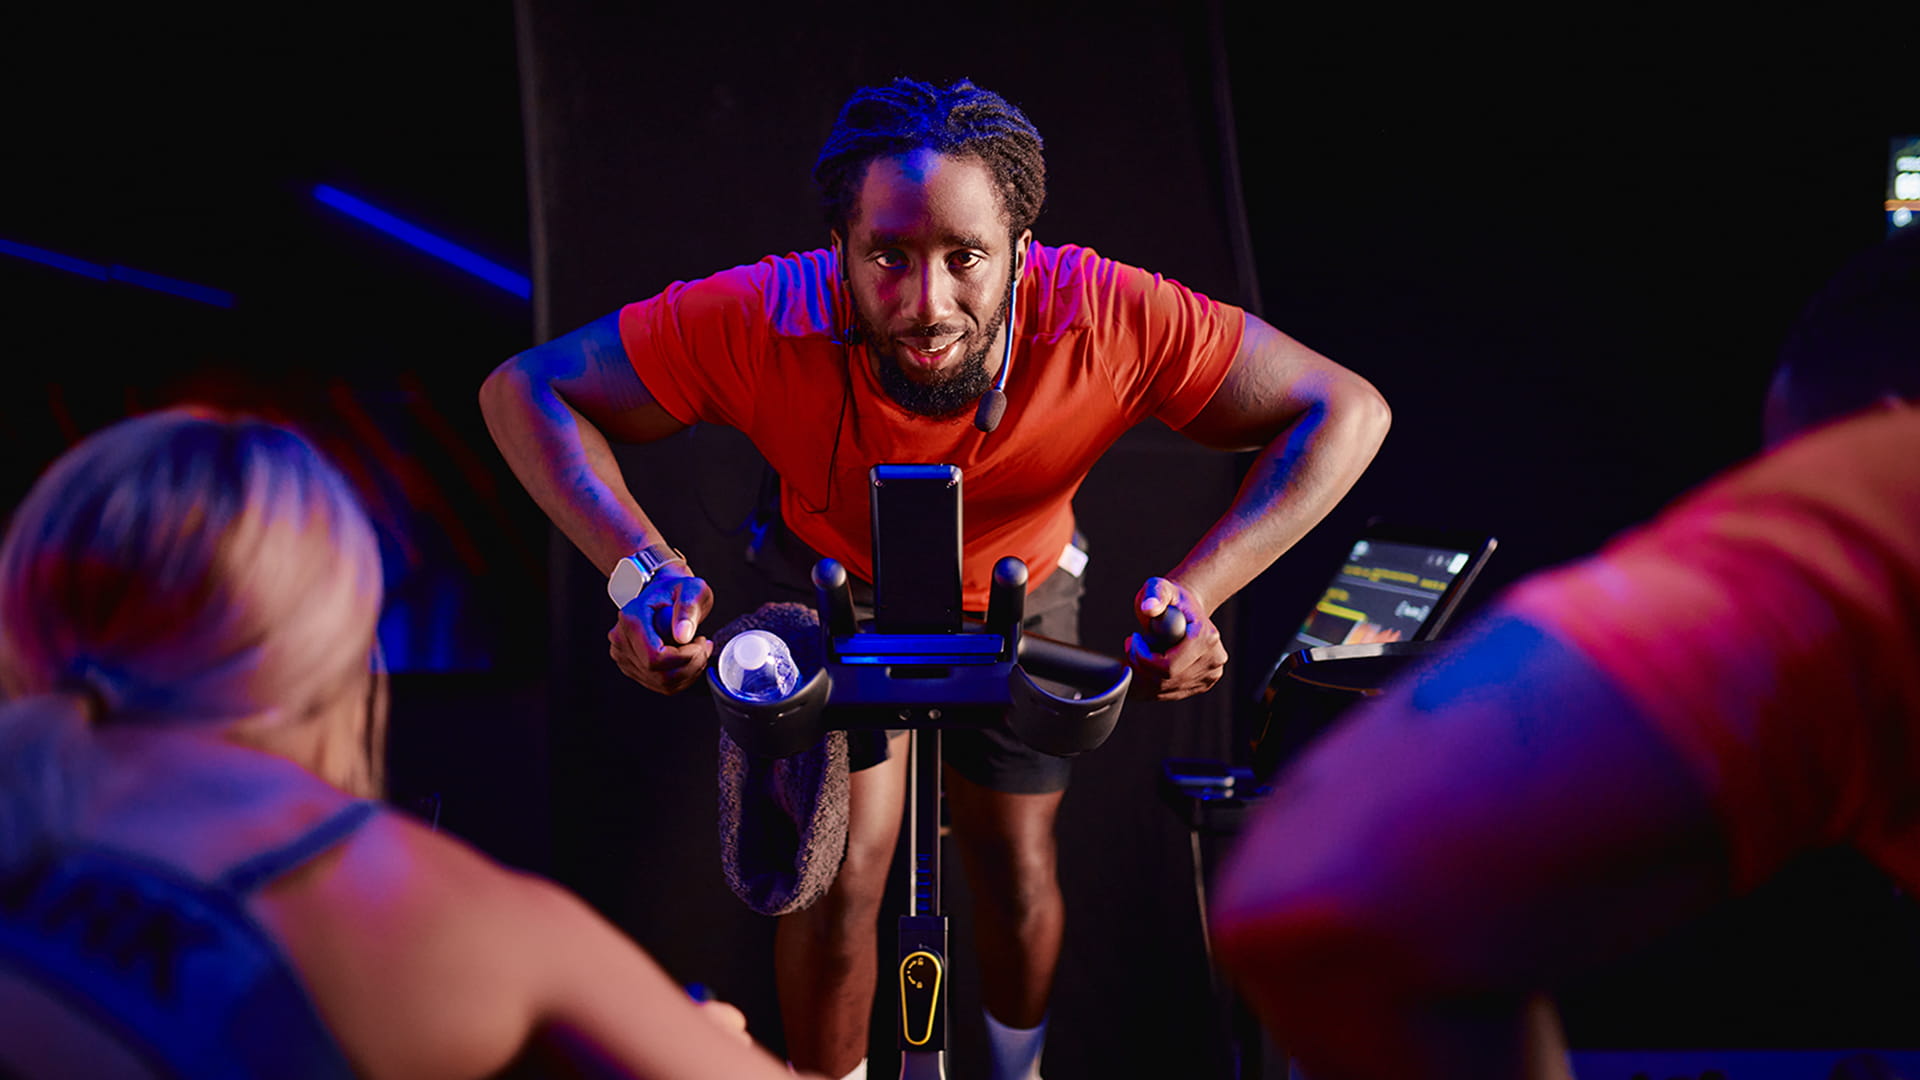 Instructor leading an indoor cycling class